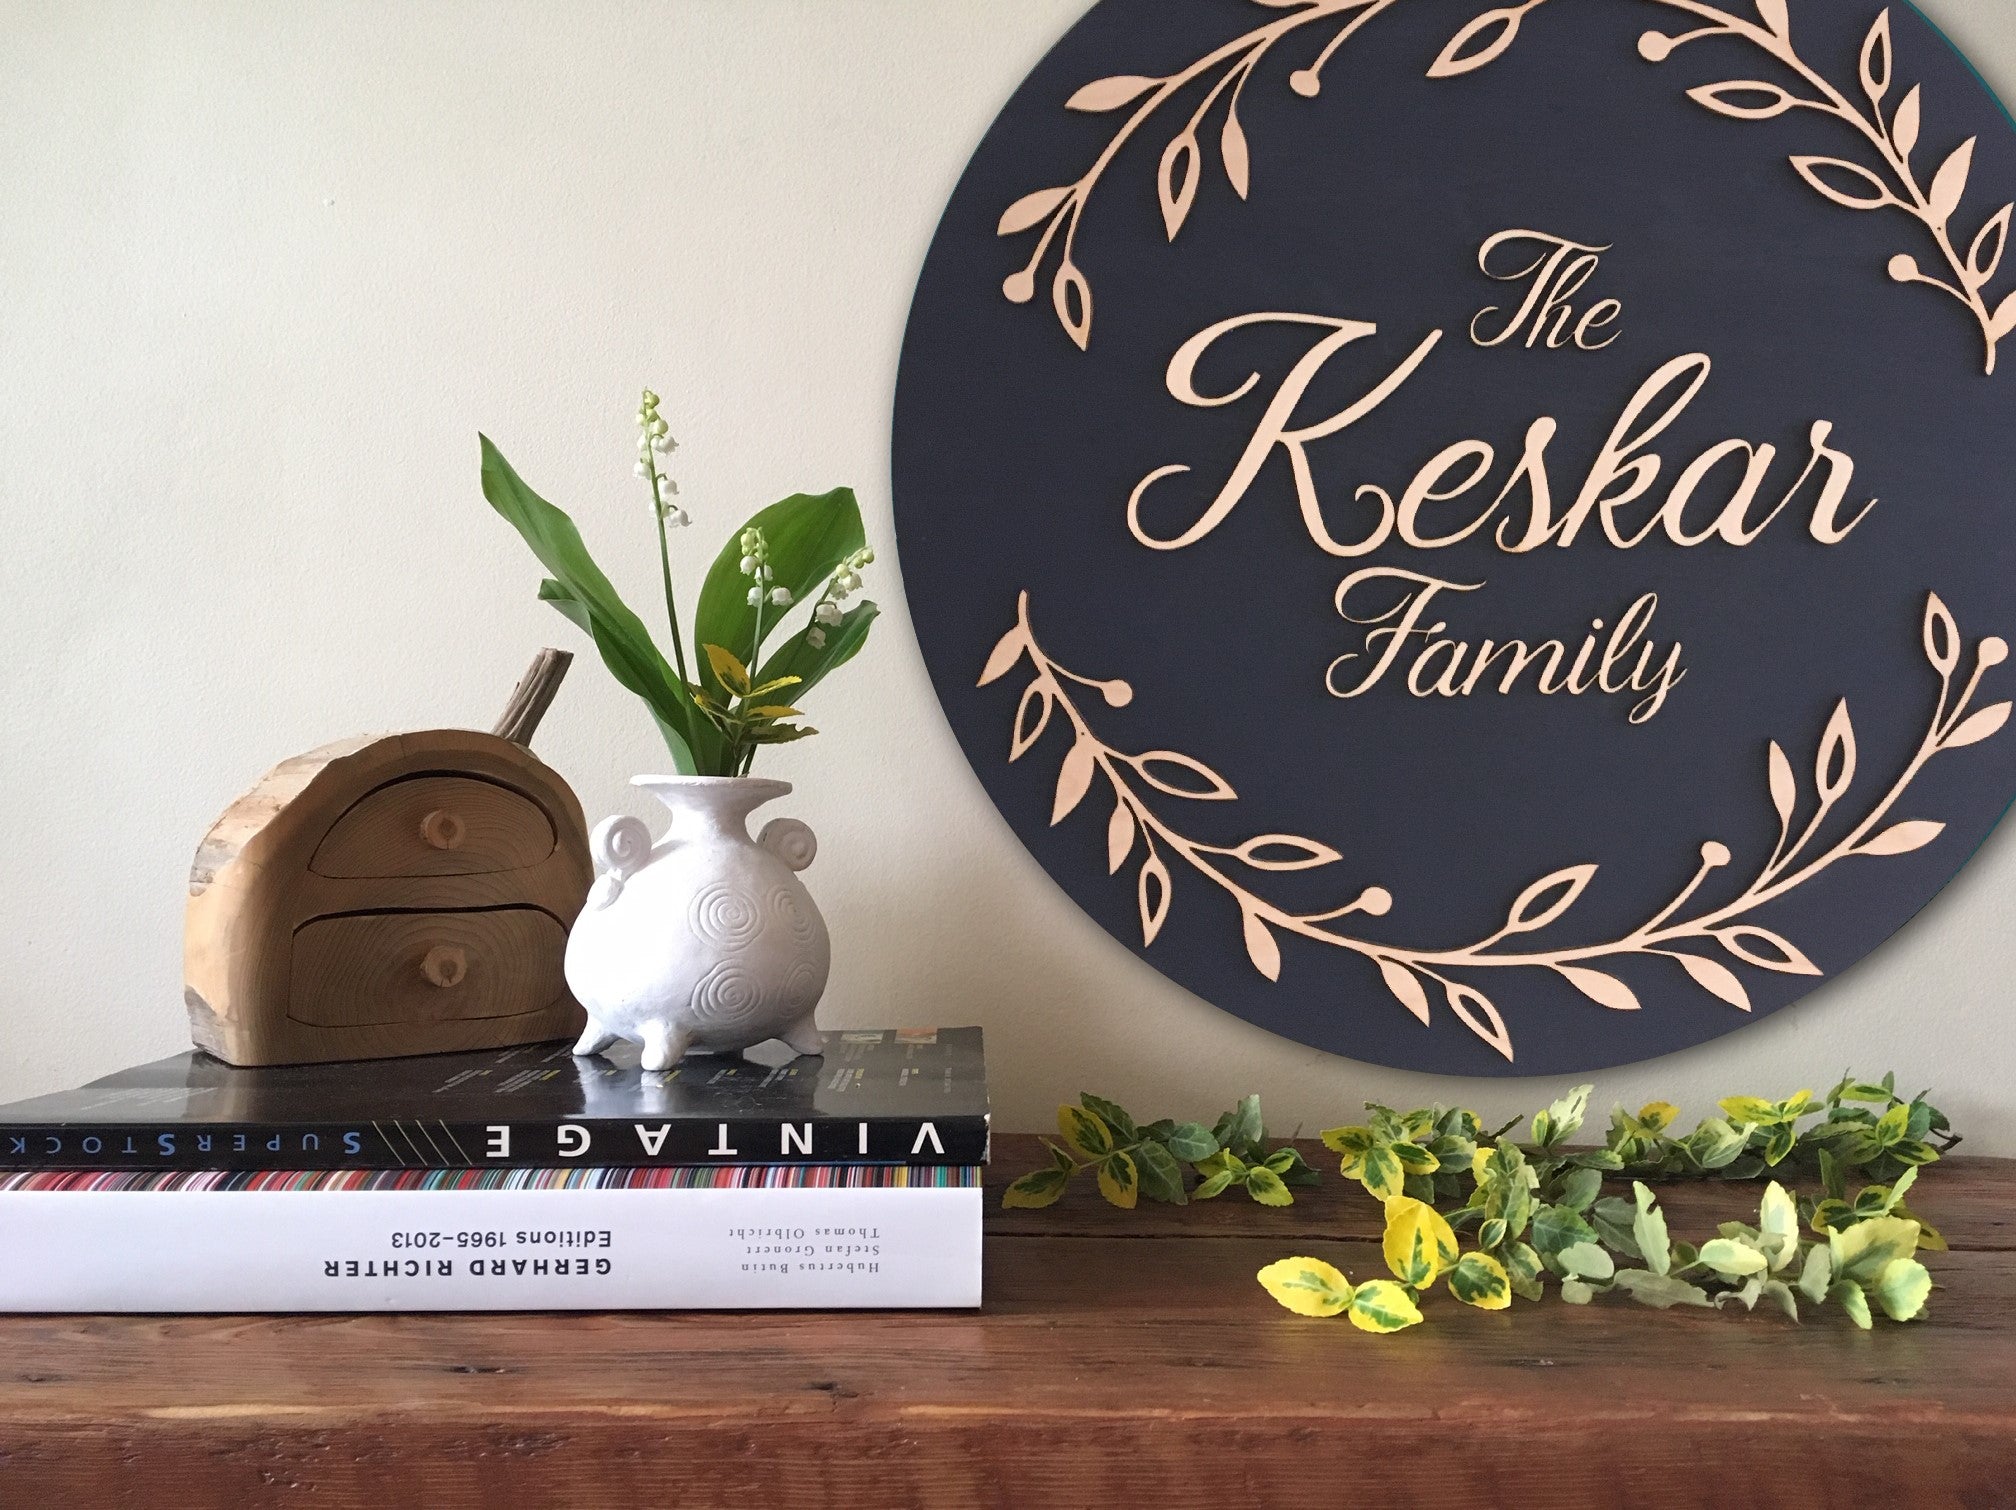 Family name 3D sign with floral motifs made of wood, personalized gift for newlyweds or anniversary, Christmas family gift